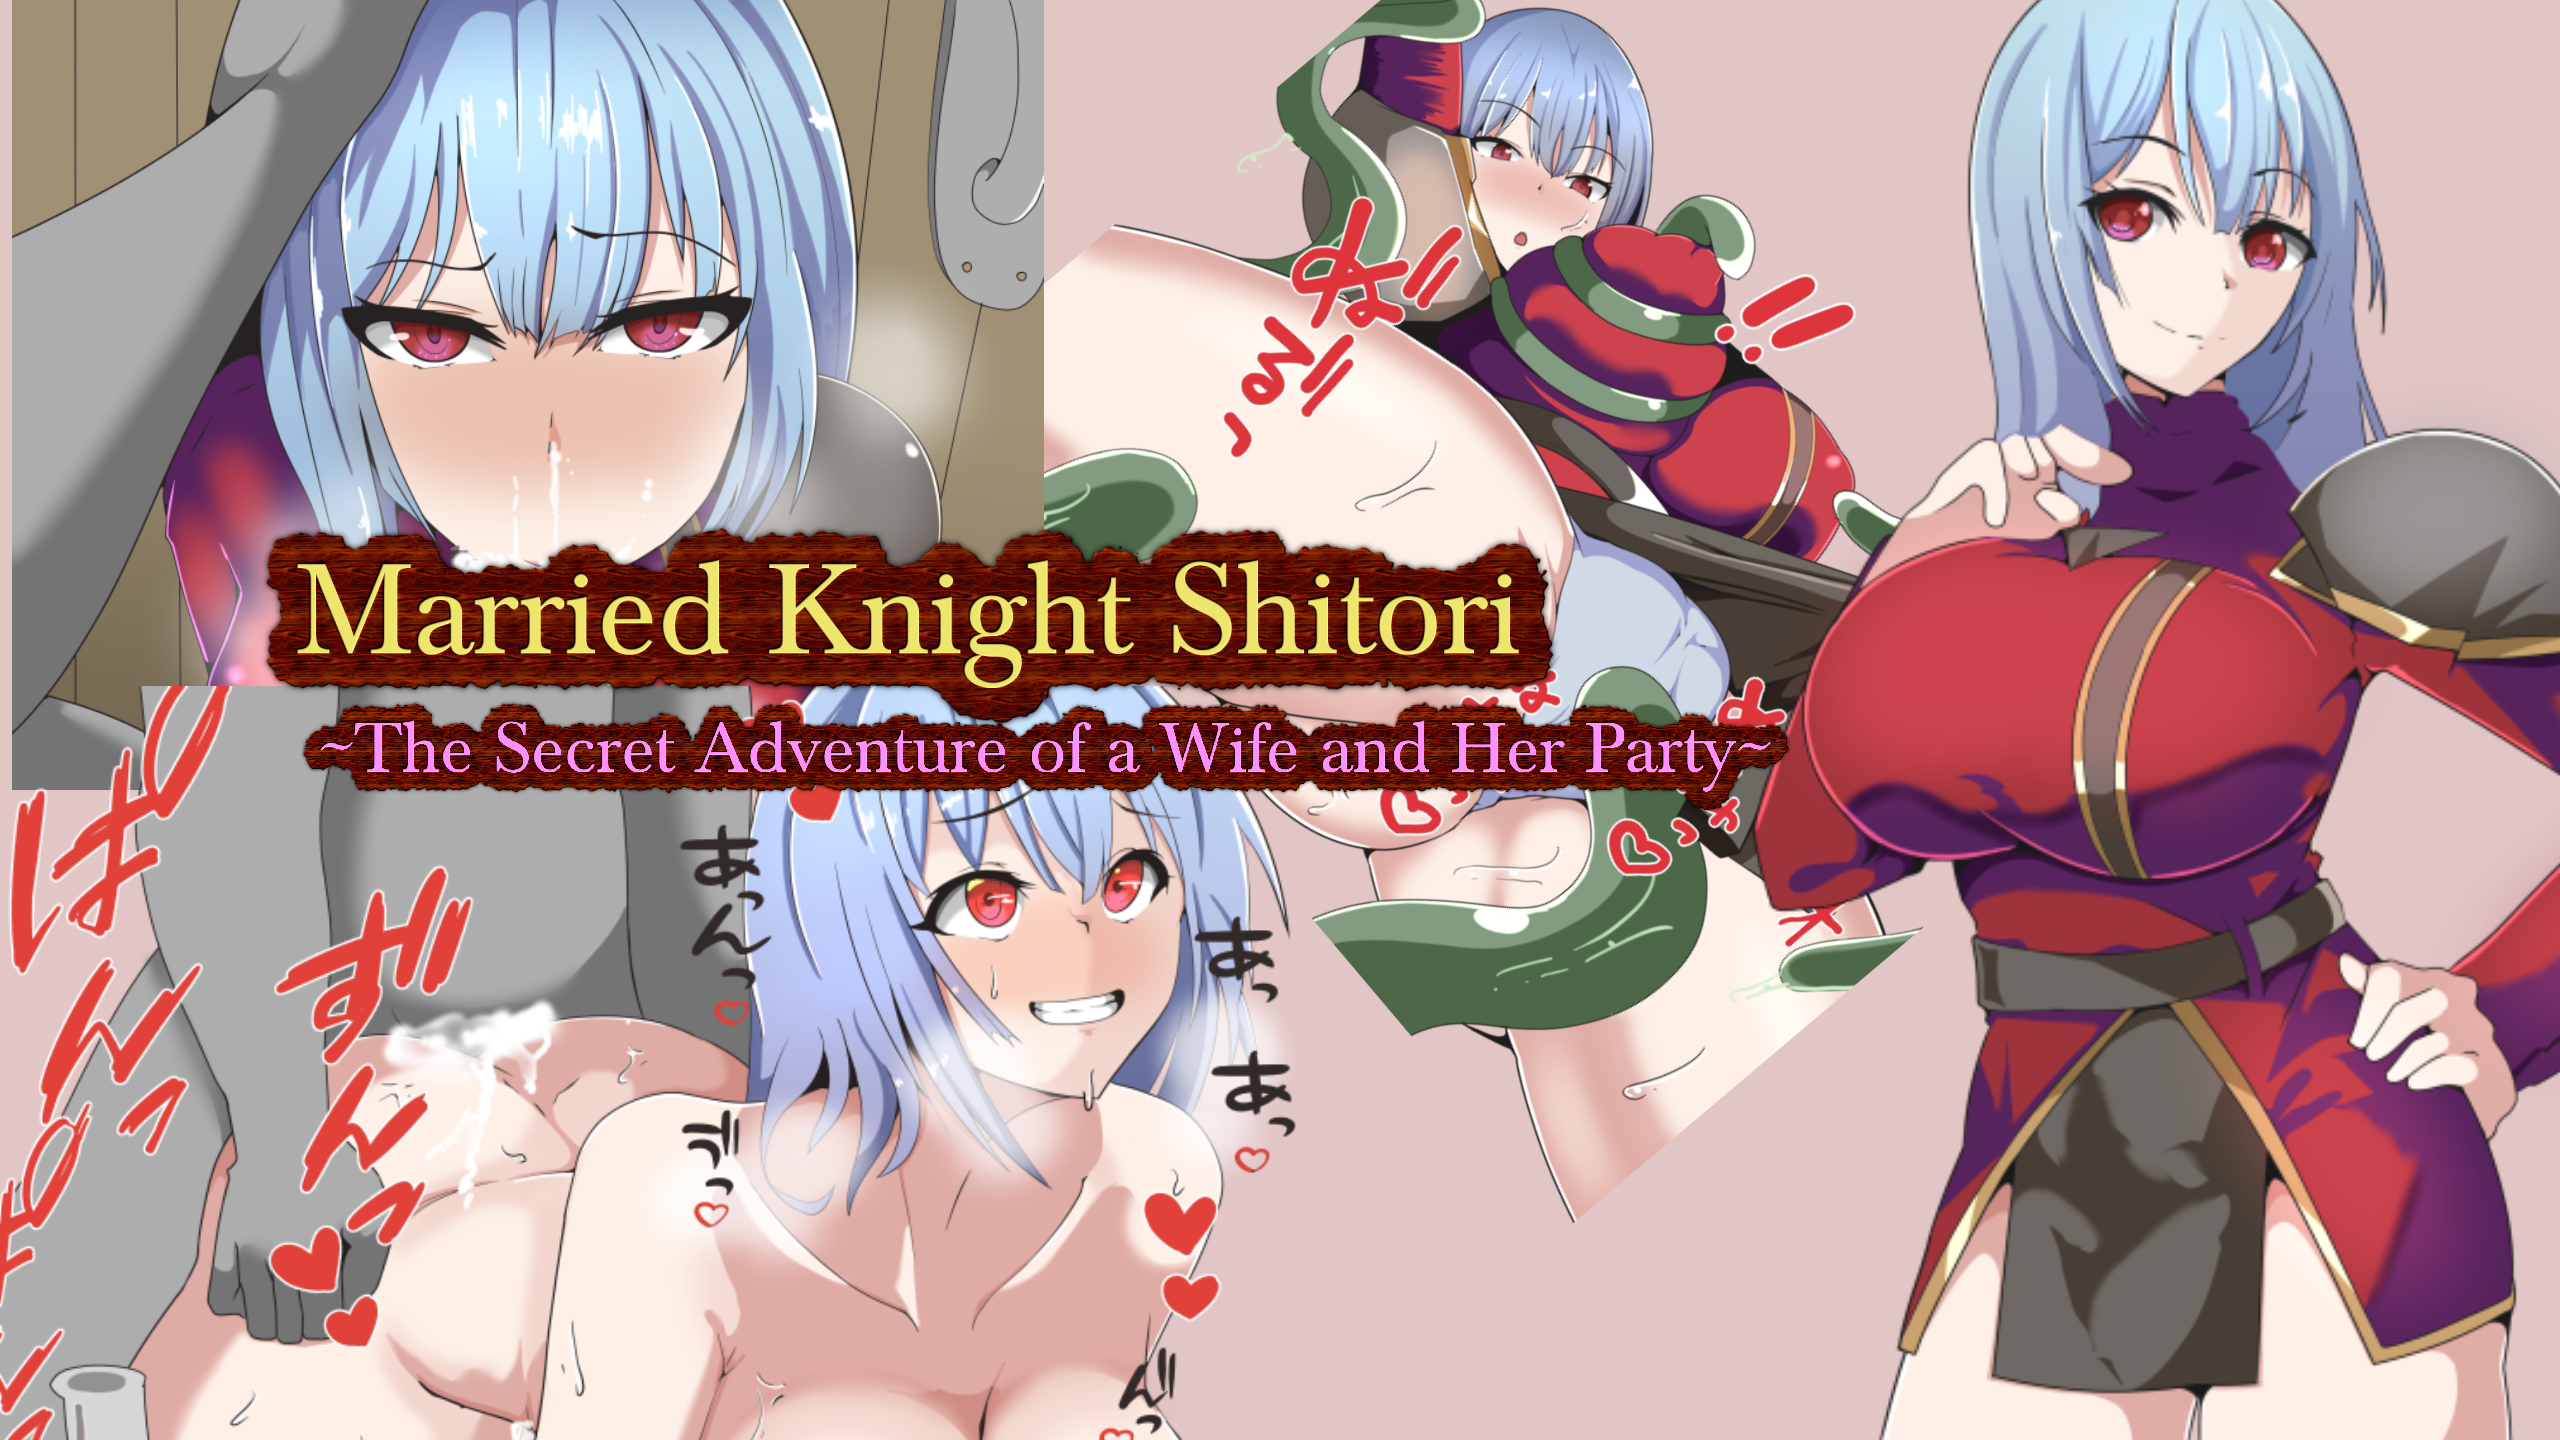 Married Knight Shitori ~The Secret Adventure of a Wife and Her Party~ [v15-04-2022 Mod 1] main image